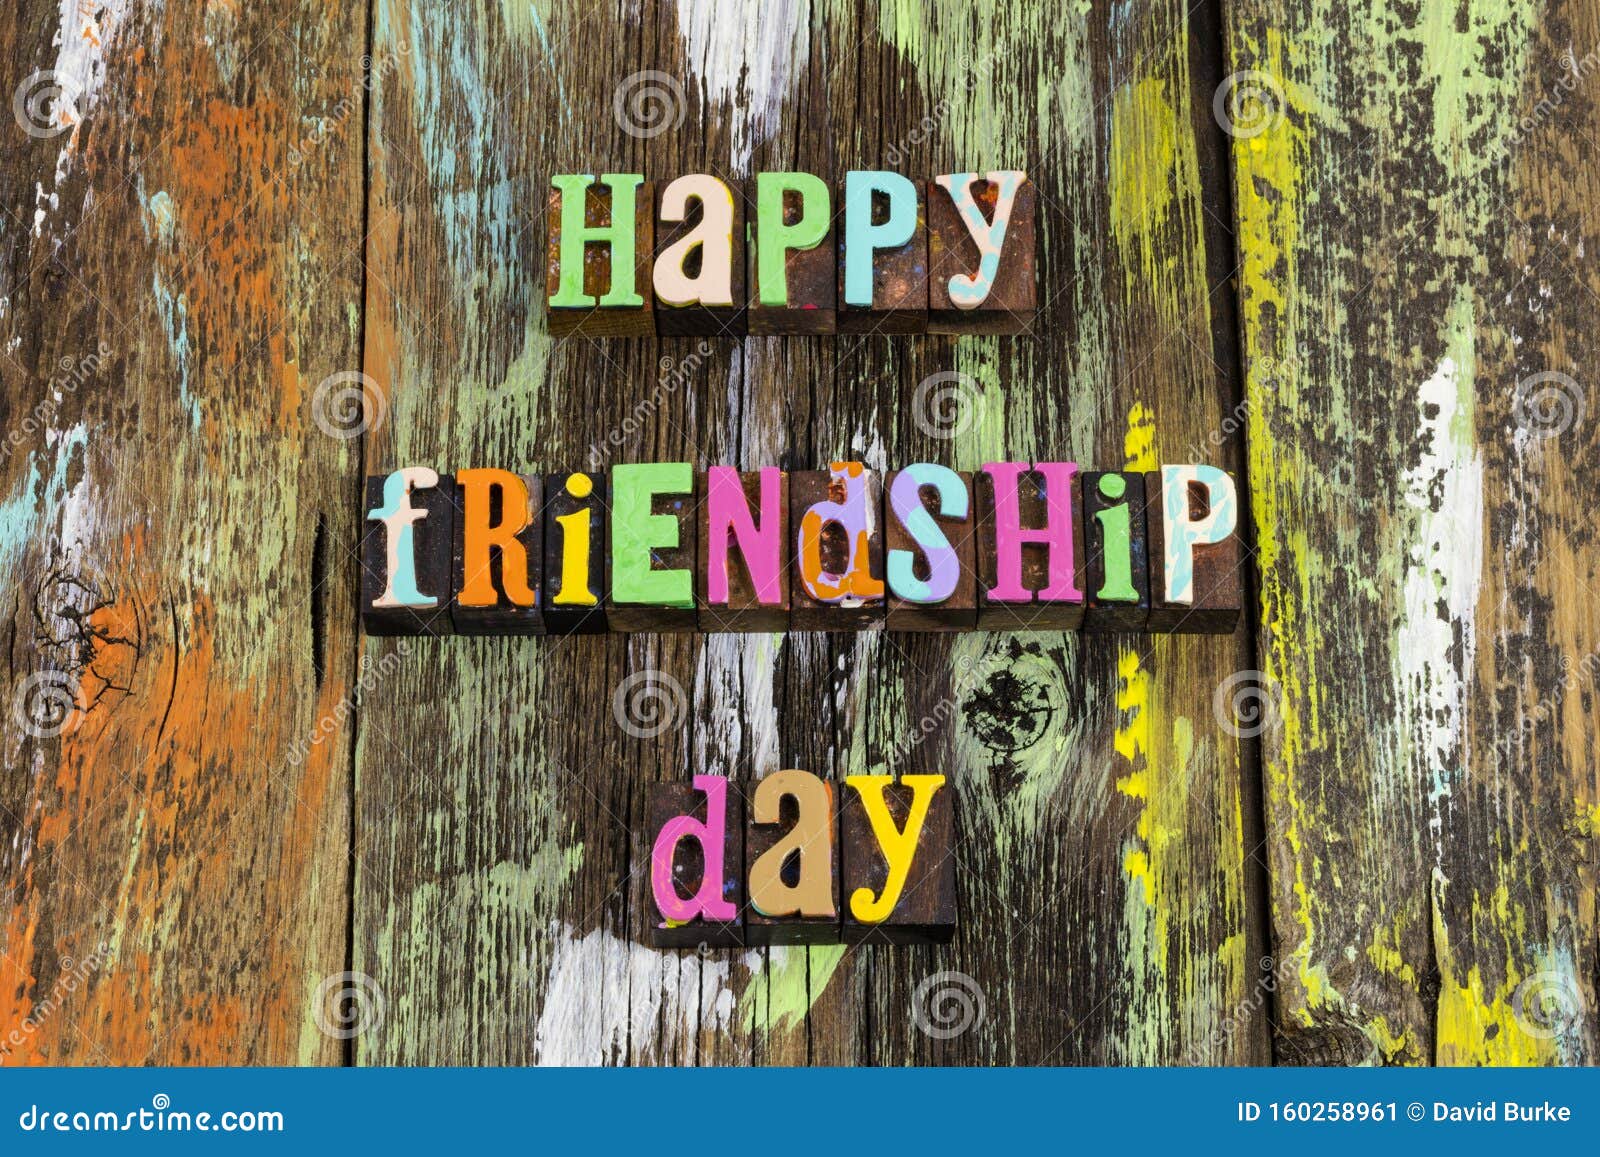 Happy Friendship Day Celebration Fun Best Friends Bff Stock Image - Image  of letter, greeting: 160258961